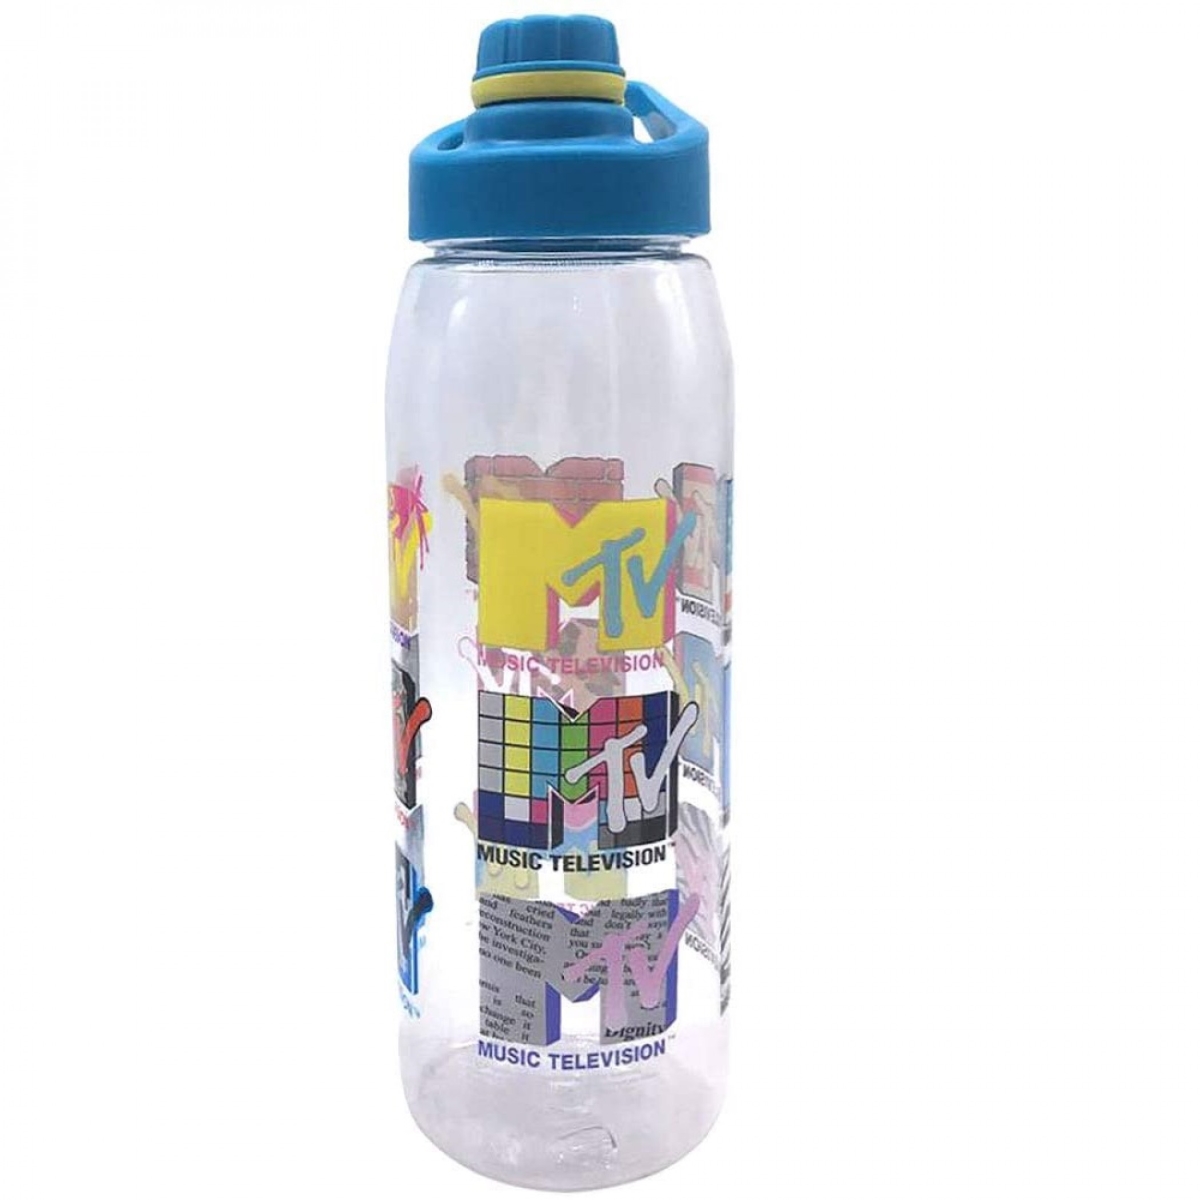 808393 28 oz Water Bottle with Screw Lid